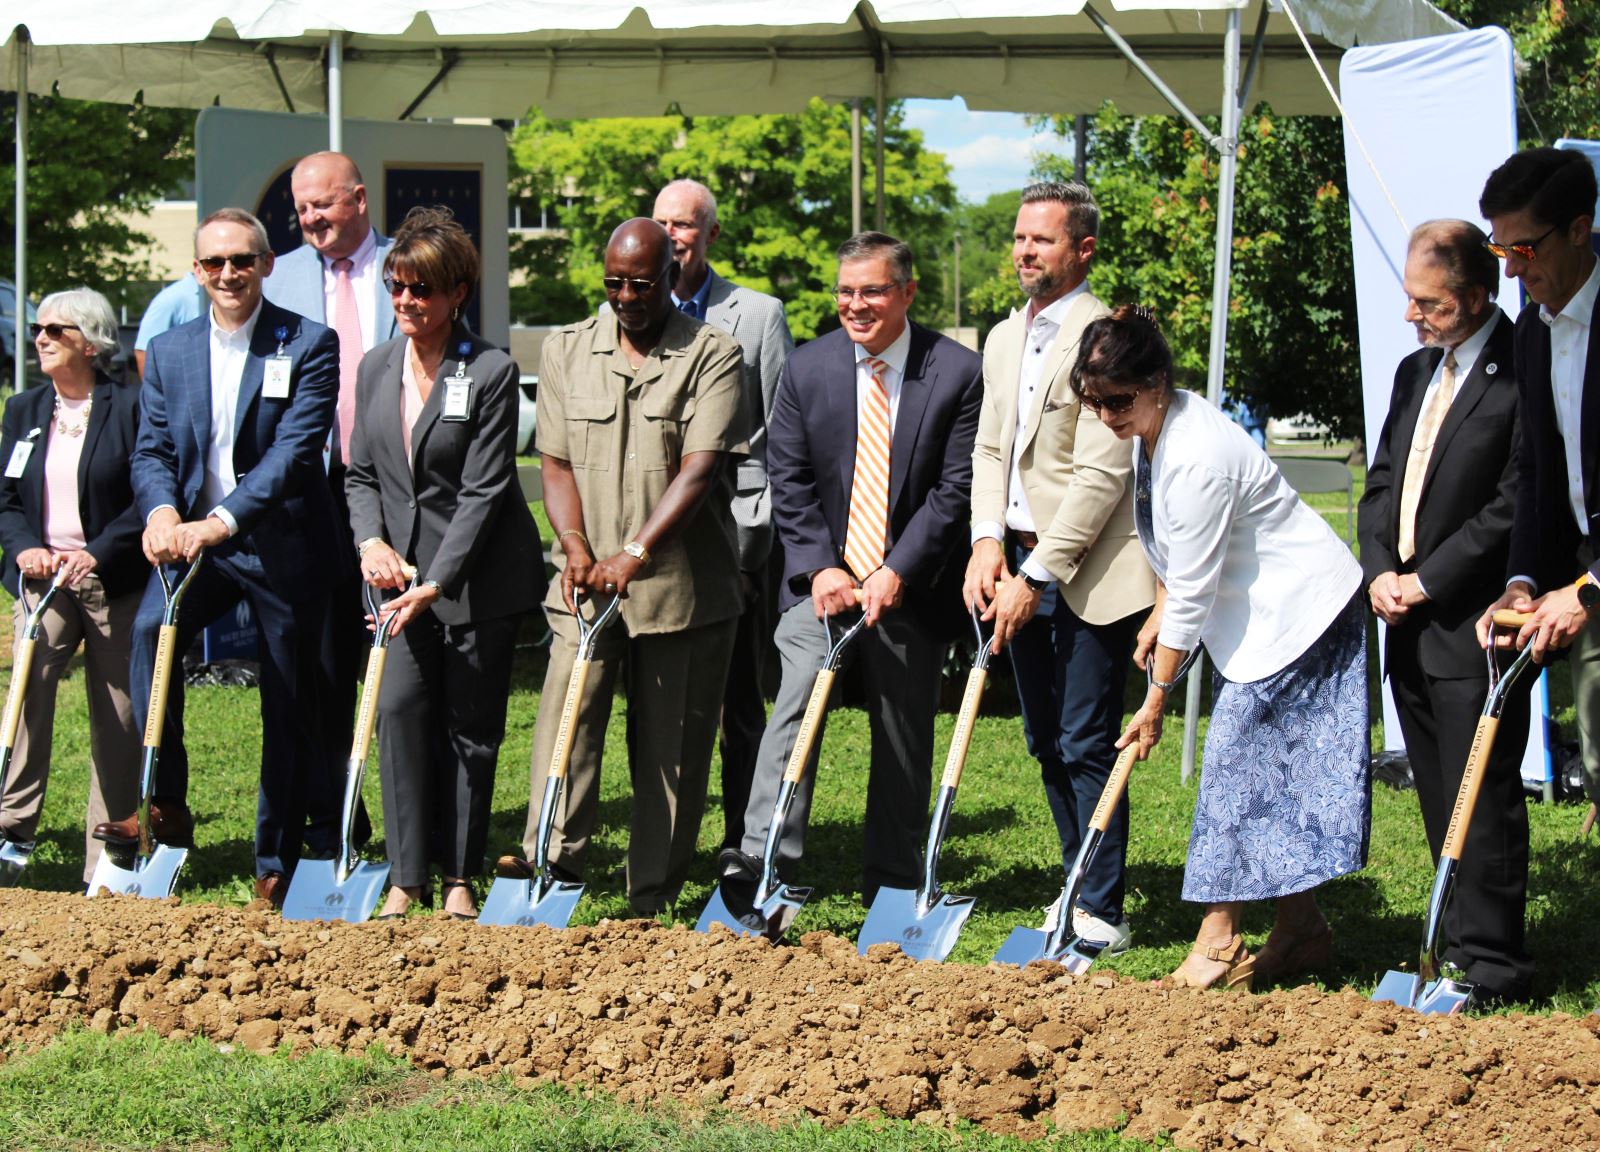 Photo of the Orthopedic Surgical Institute groundbreaking